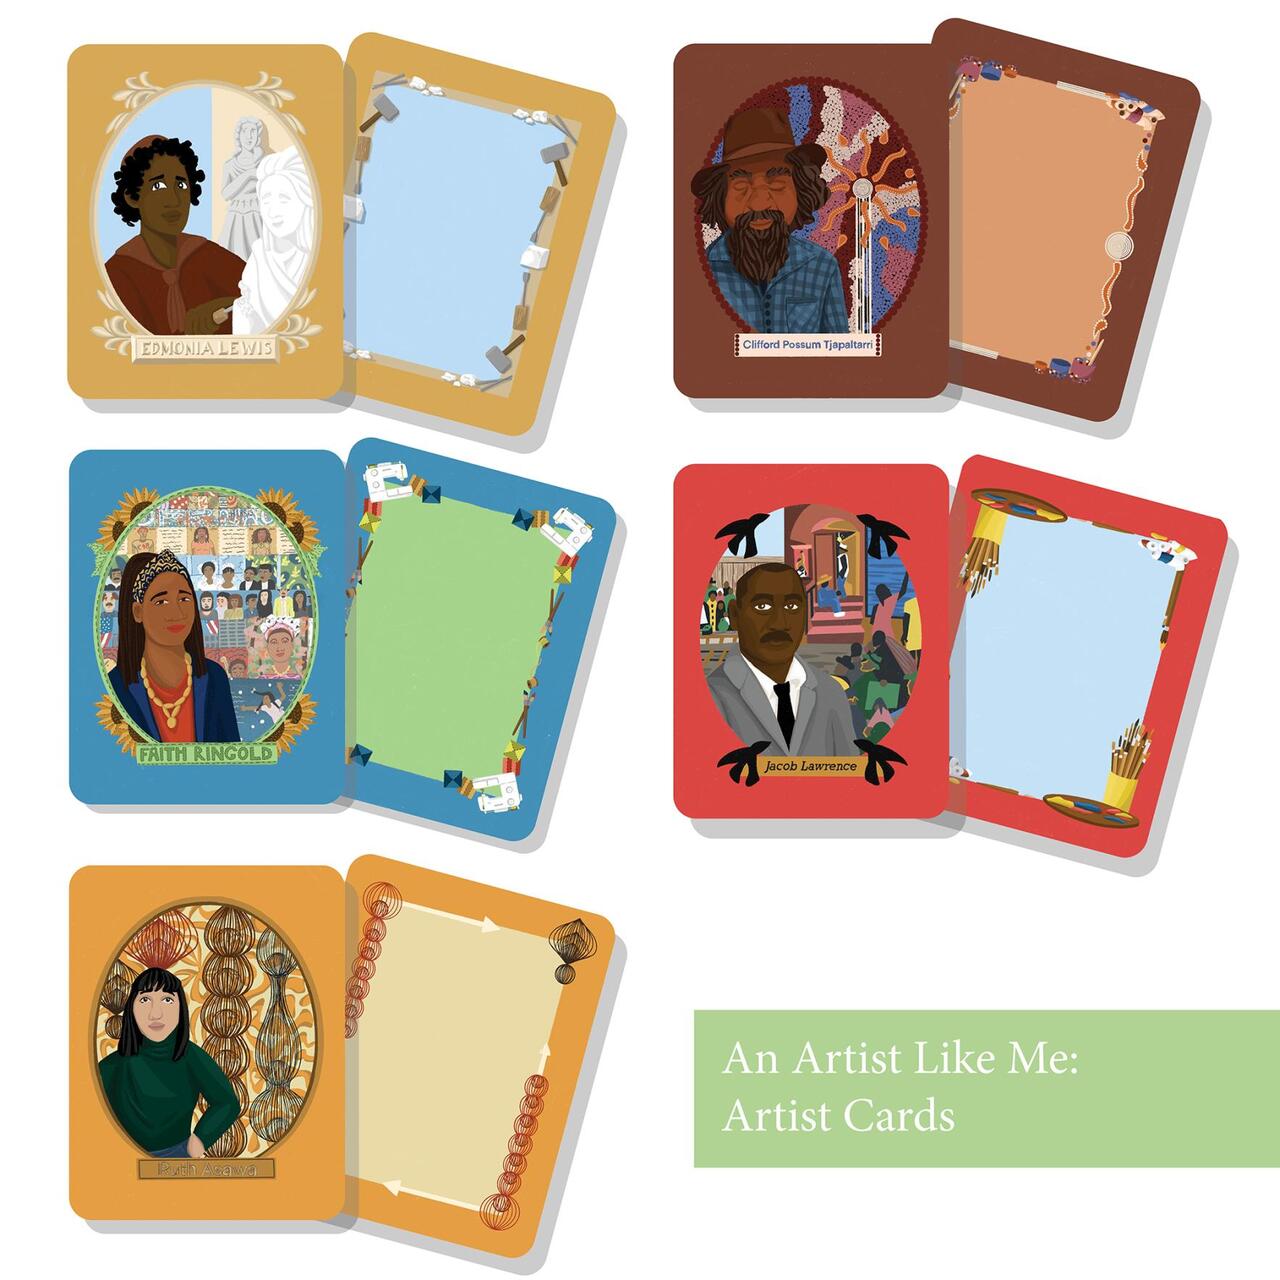 An Artist Like Me (Card Designs) by Lily Wendt